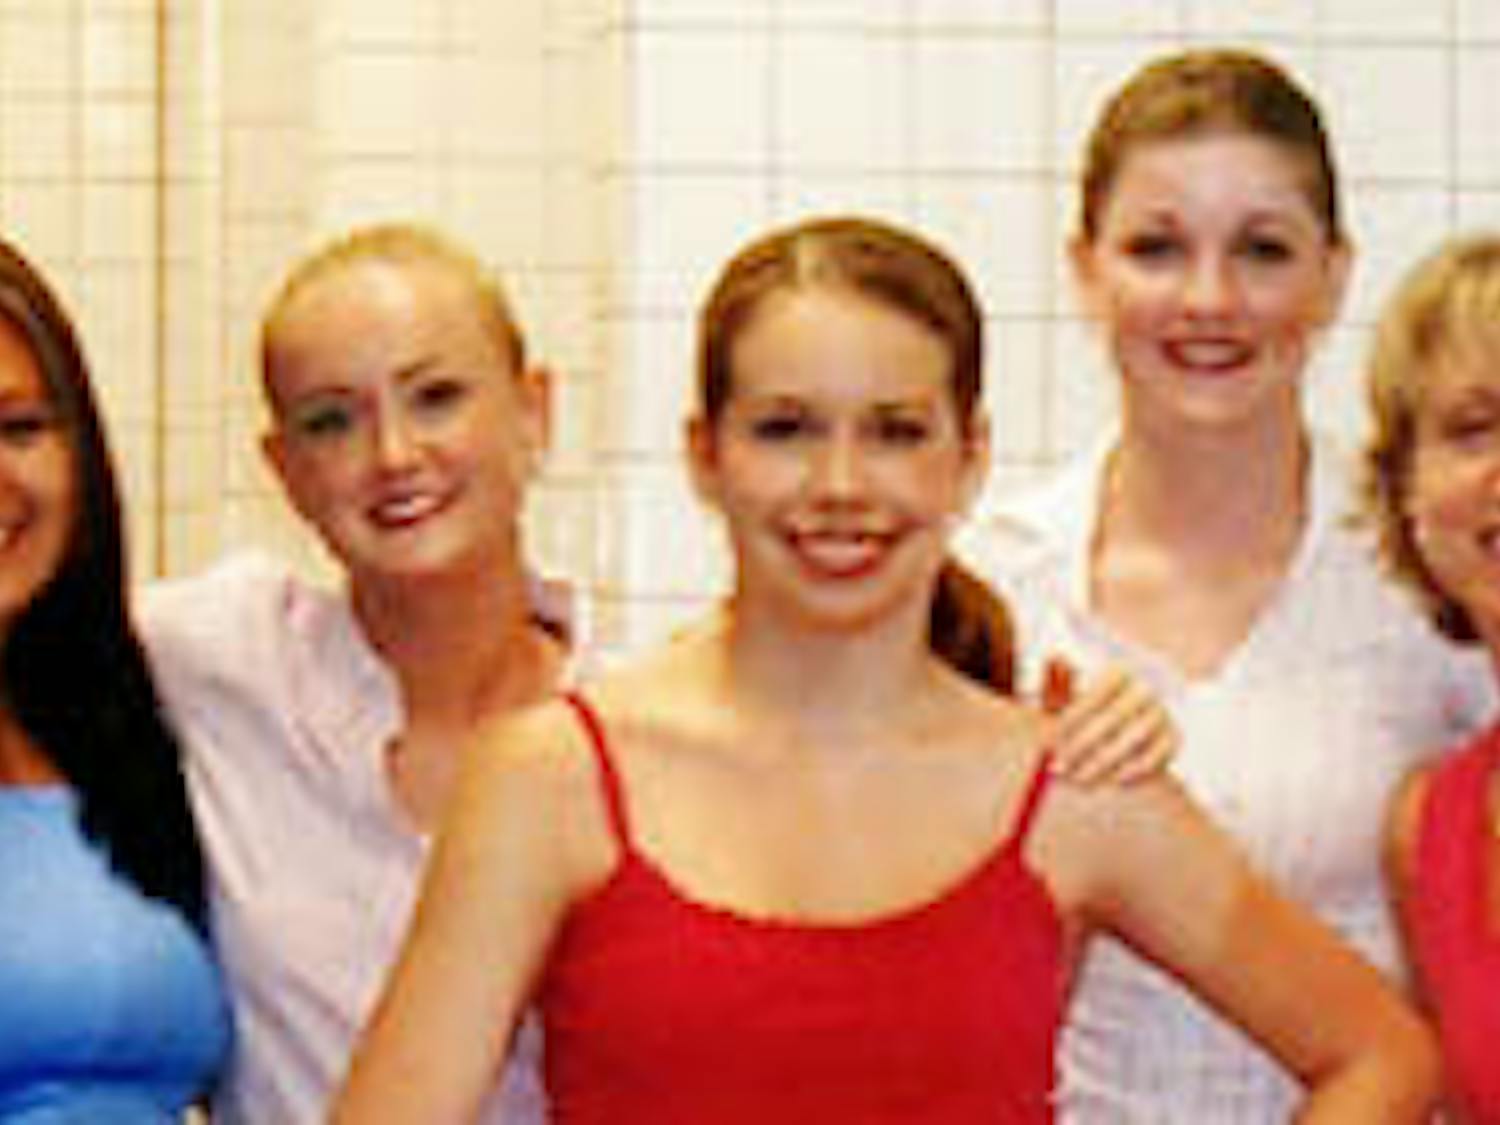 Christie Nguyen (far left), a mother, longtime Santa Fe College student and dancer, died in Sunday morning's Interstate 75 accident.